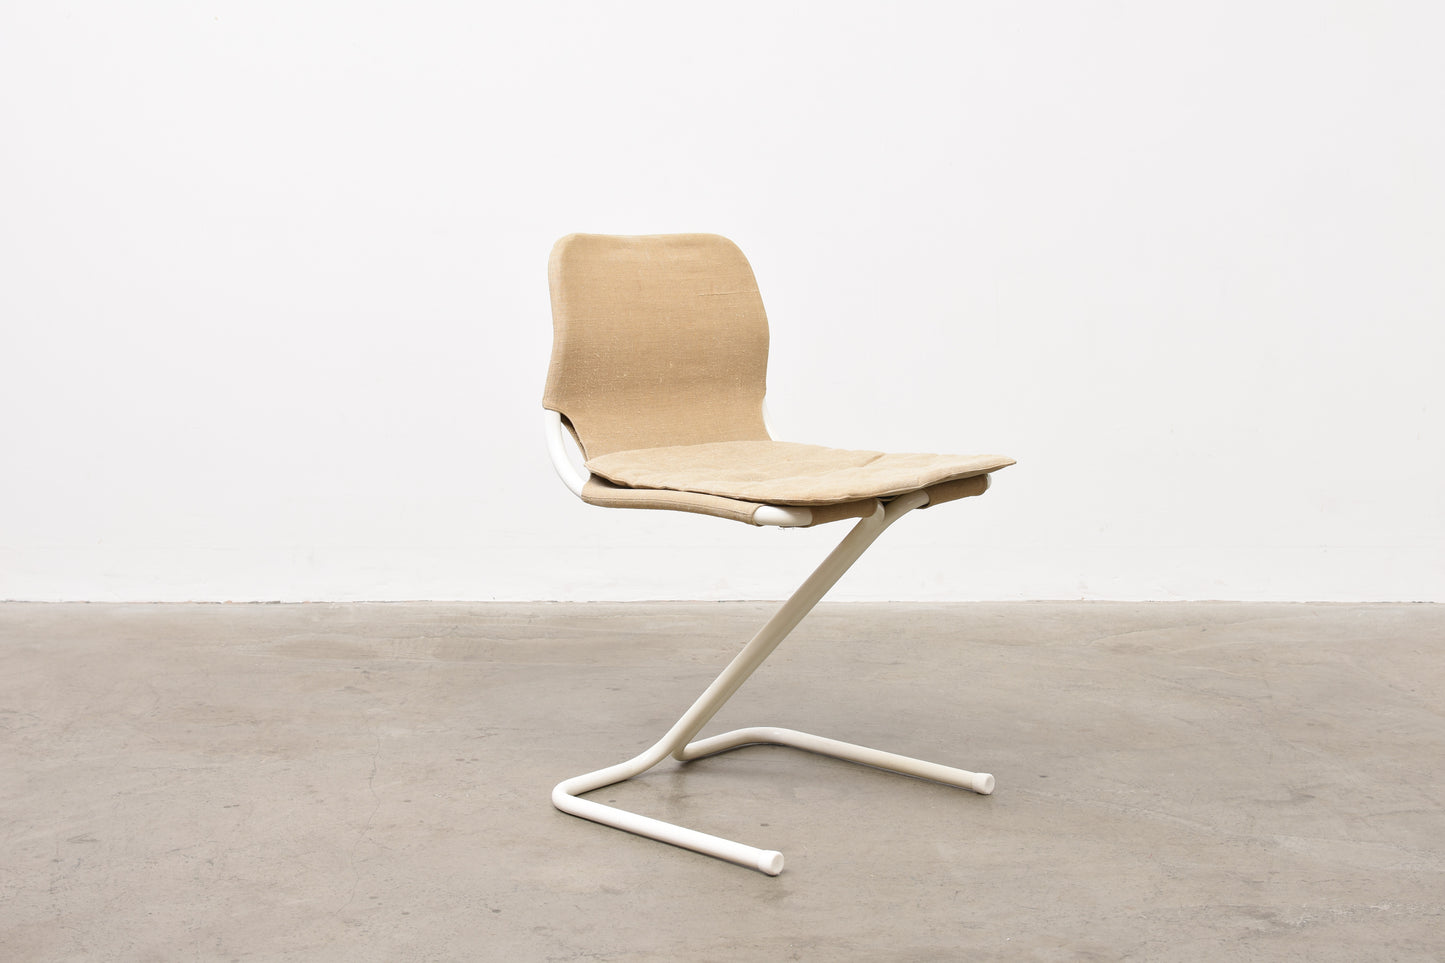 Set of metal + canvas chairs by Ekstrand & Norman